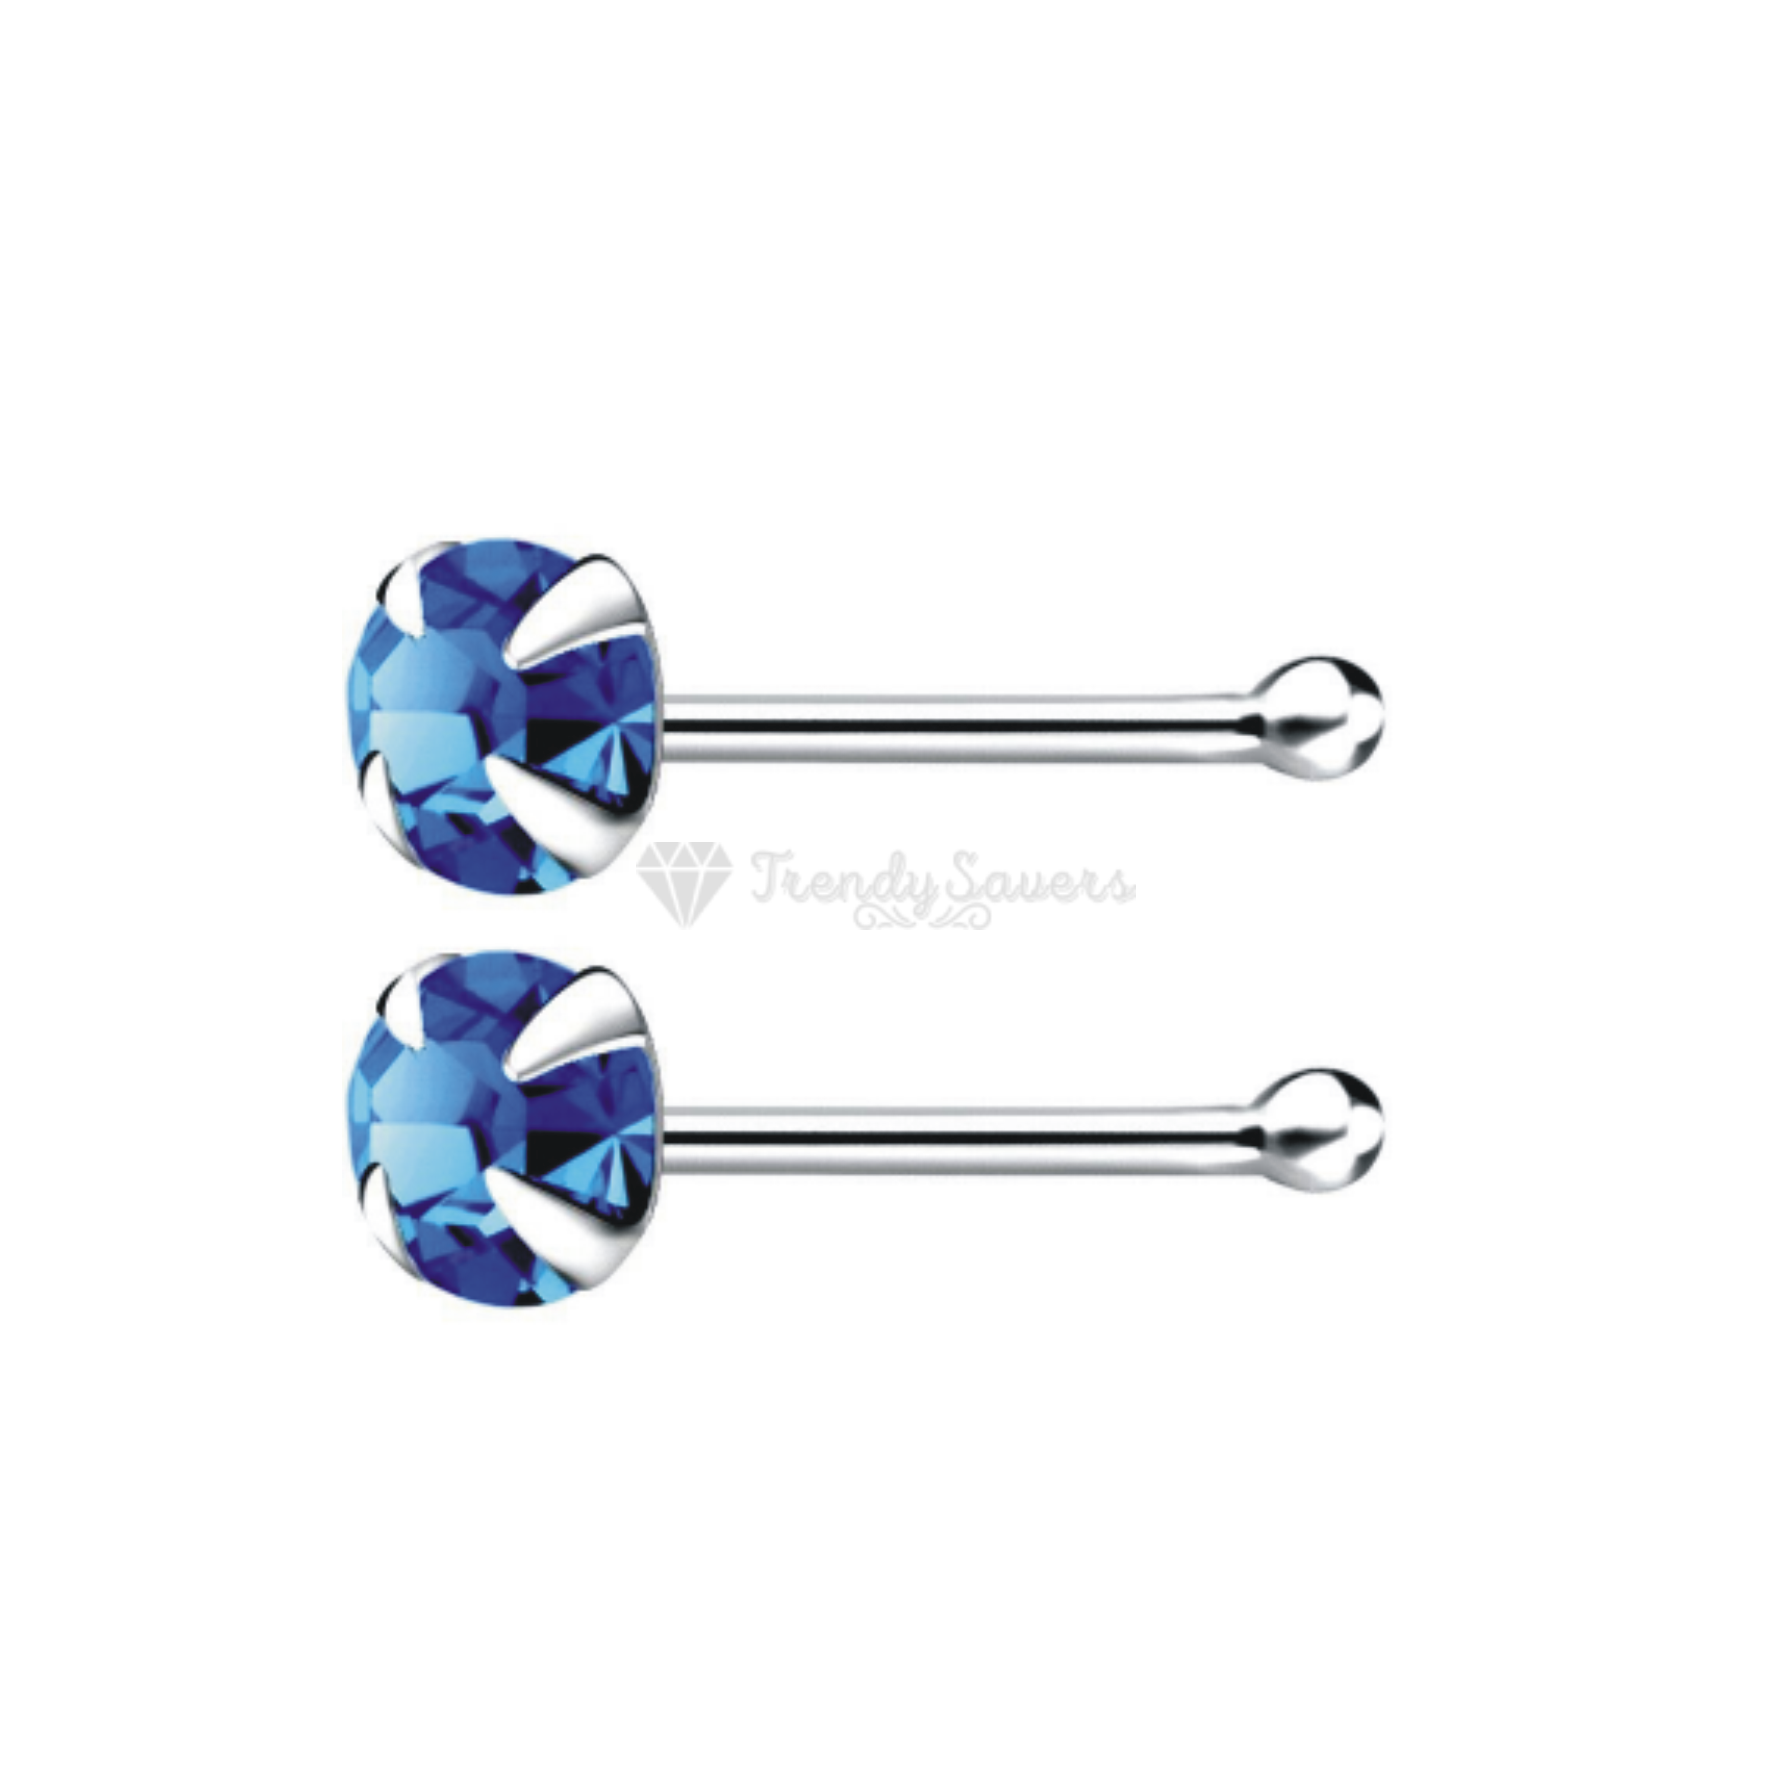 Blue Crystal Stone Nostril Stud Ring 2MM Tiny Round Nose Piercing Unisex Jewelry